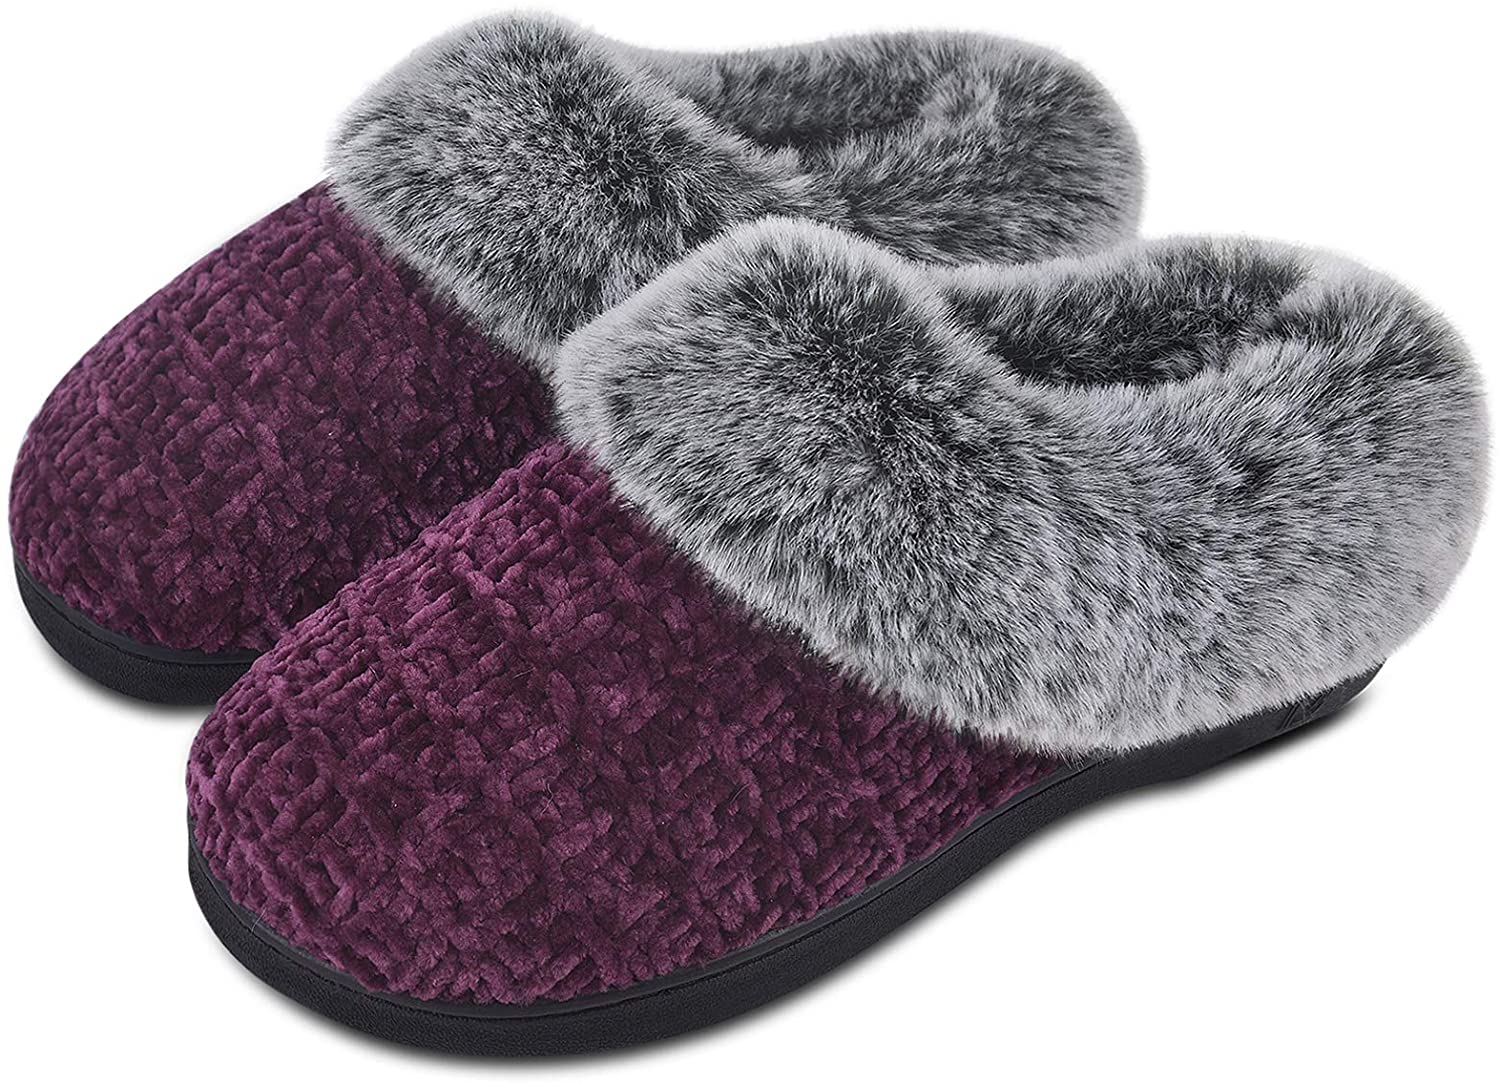 Fluffy Velvet Slip on Scuff Slippers for Women Indoor DL Womens-House-Slippers-Memory-Foam Warm Furry Ladies Bedroom Slippers with Non Slip Outsole Pink Gray 